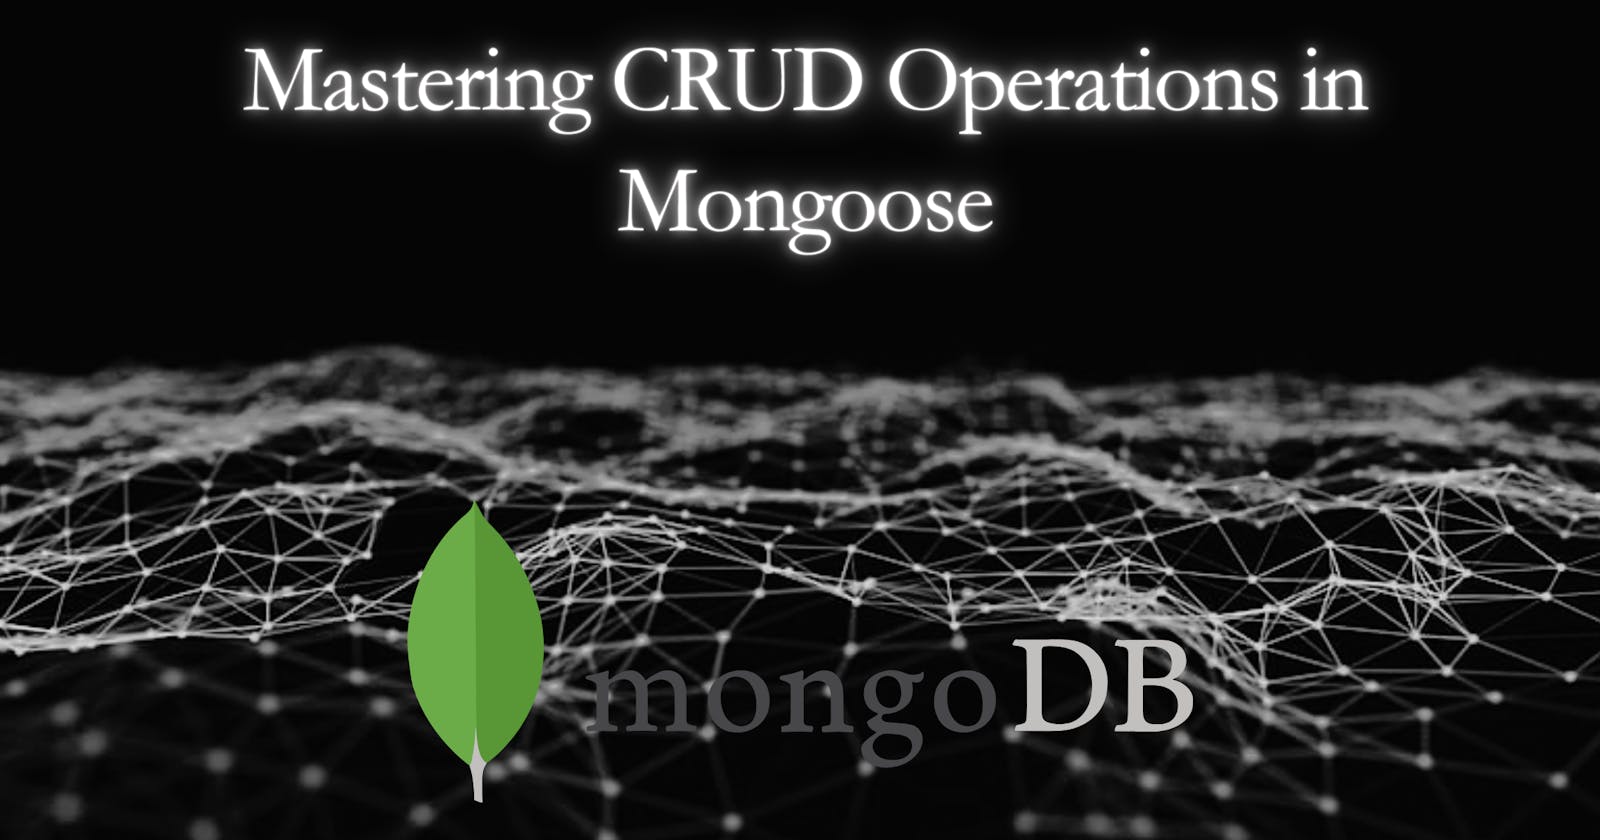 Mastering CRUD Operations in Mongoose